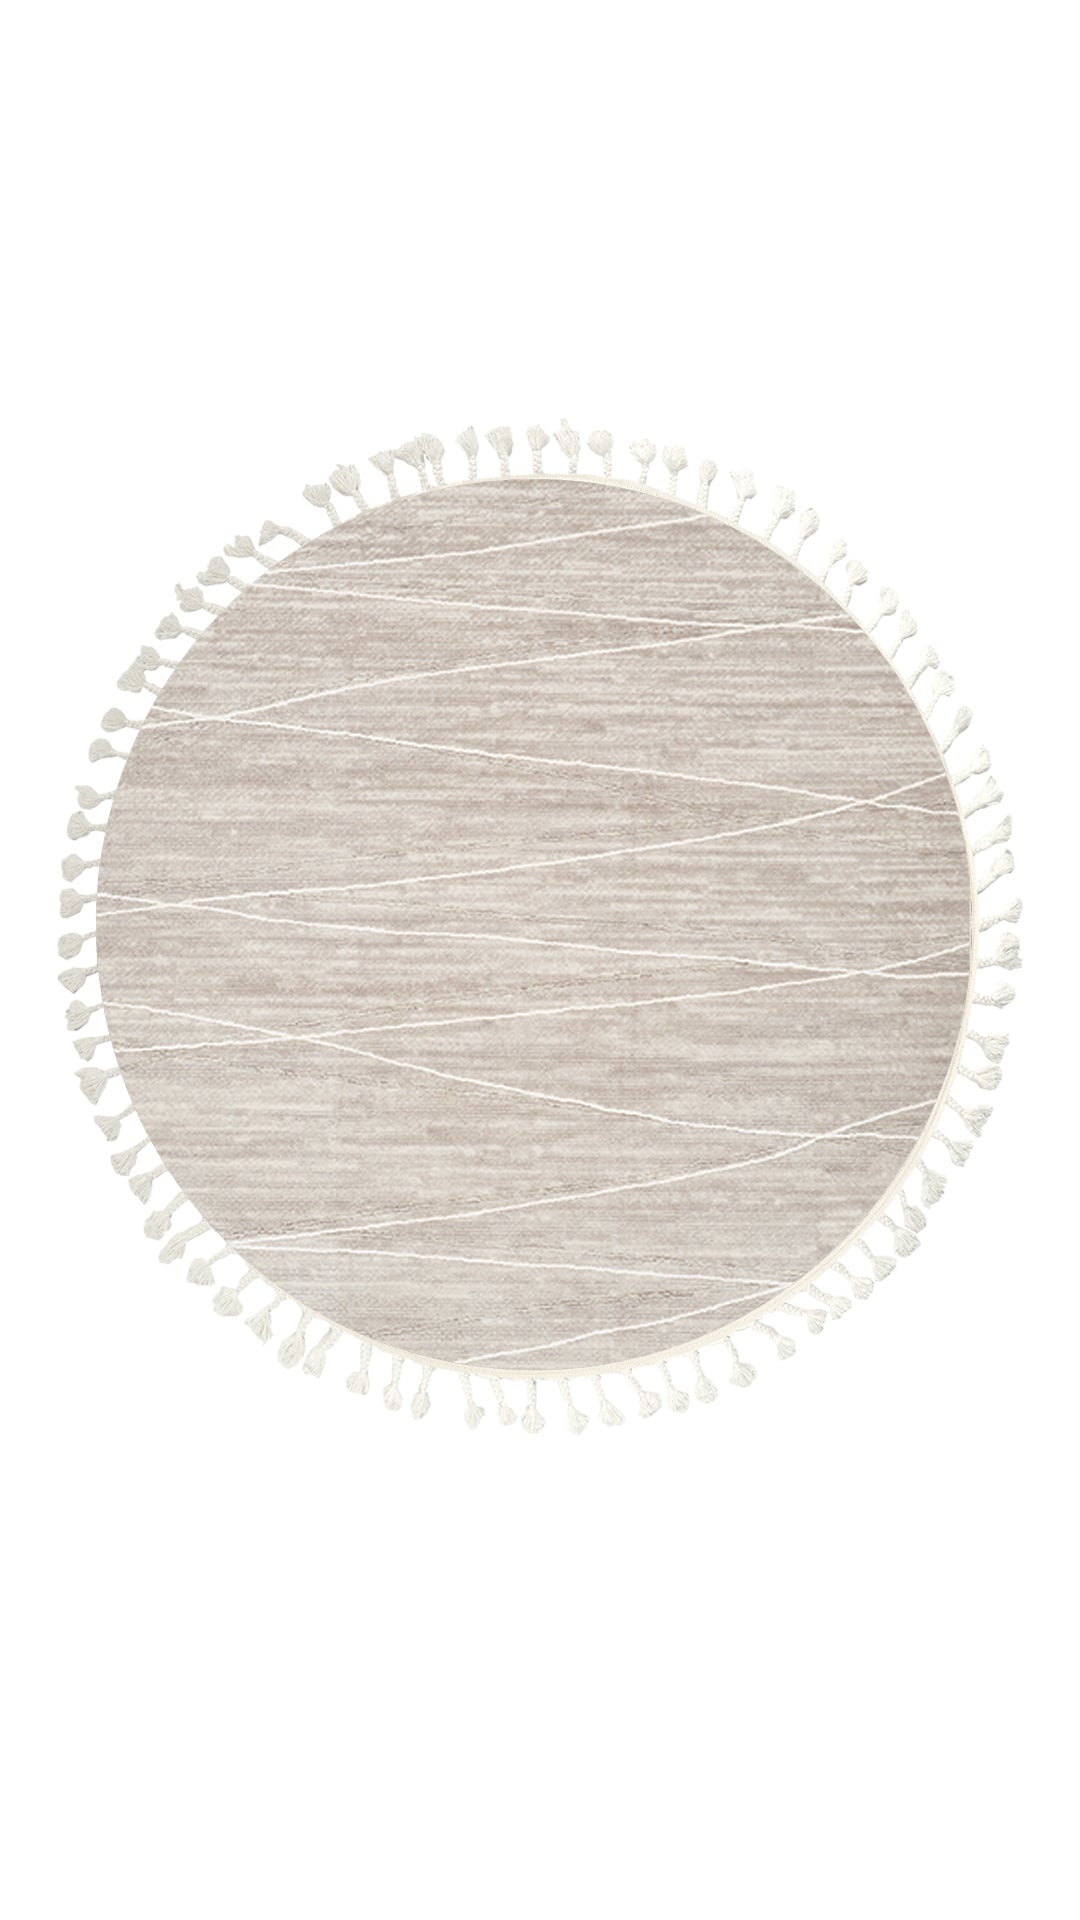 Dolce Vita Rug Monza 4207 Silver Stone Round Living Room Rug